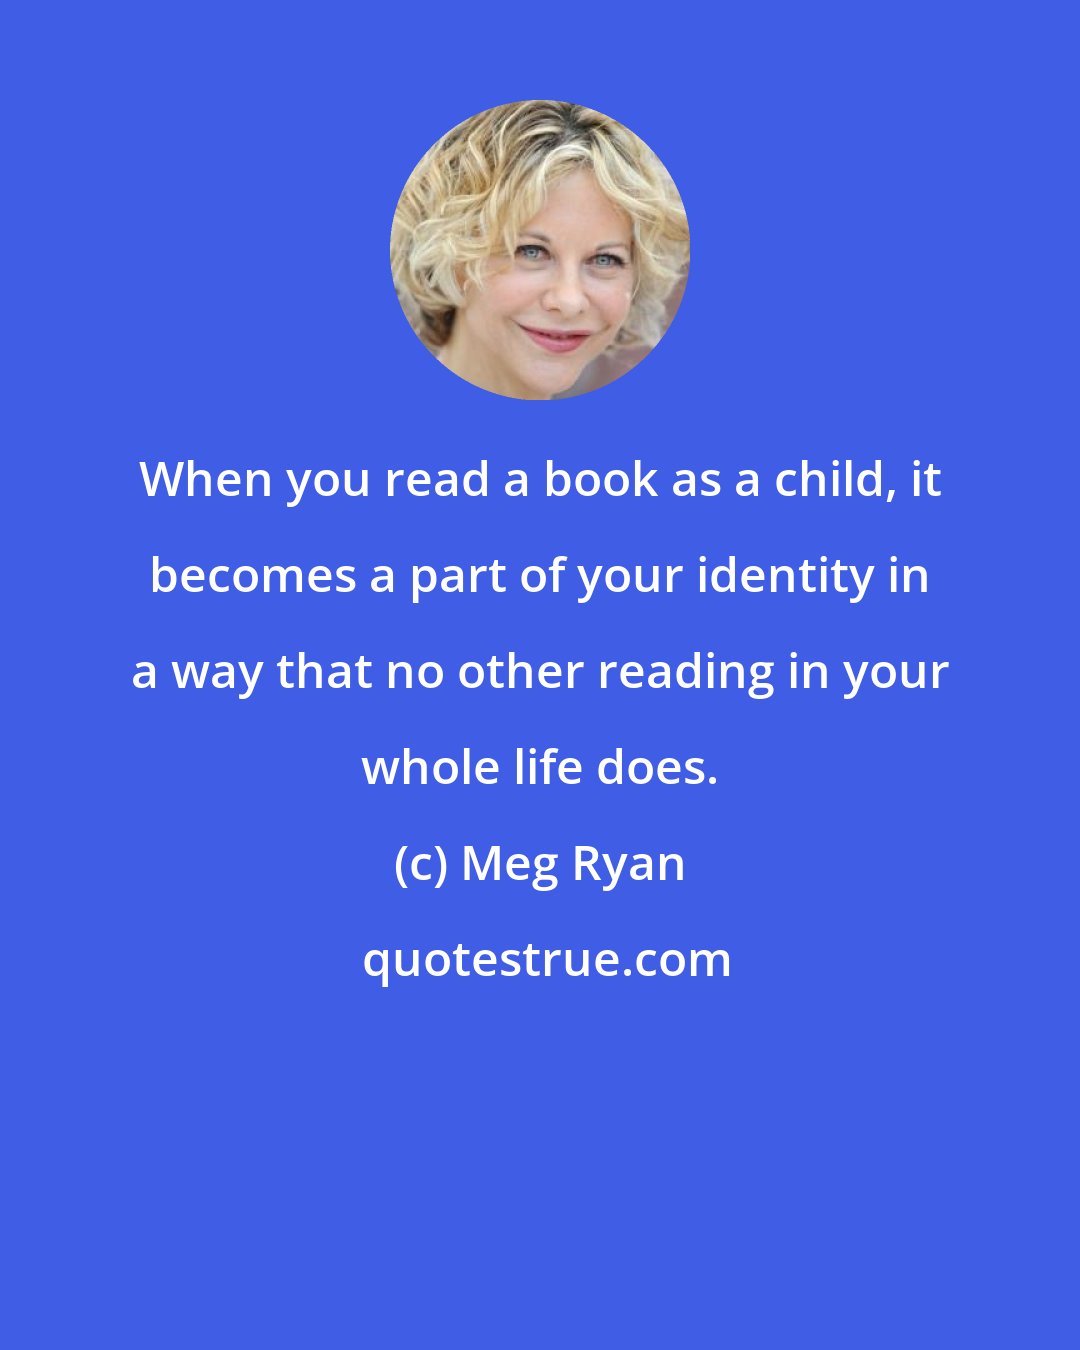 Meg Ryan: When you read a book as a child, it becomes a part of your identity in a way that no other reading in your whole life does.